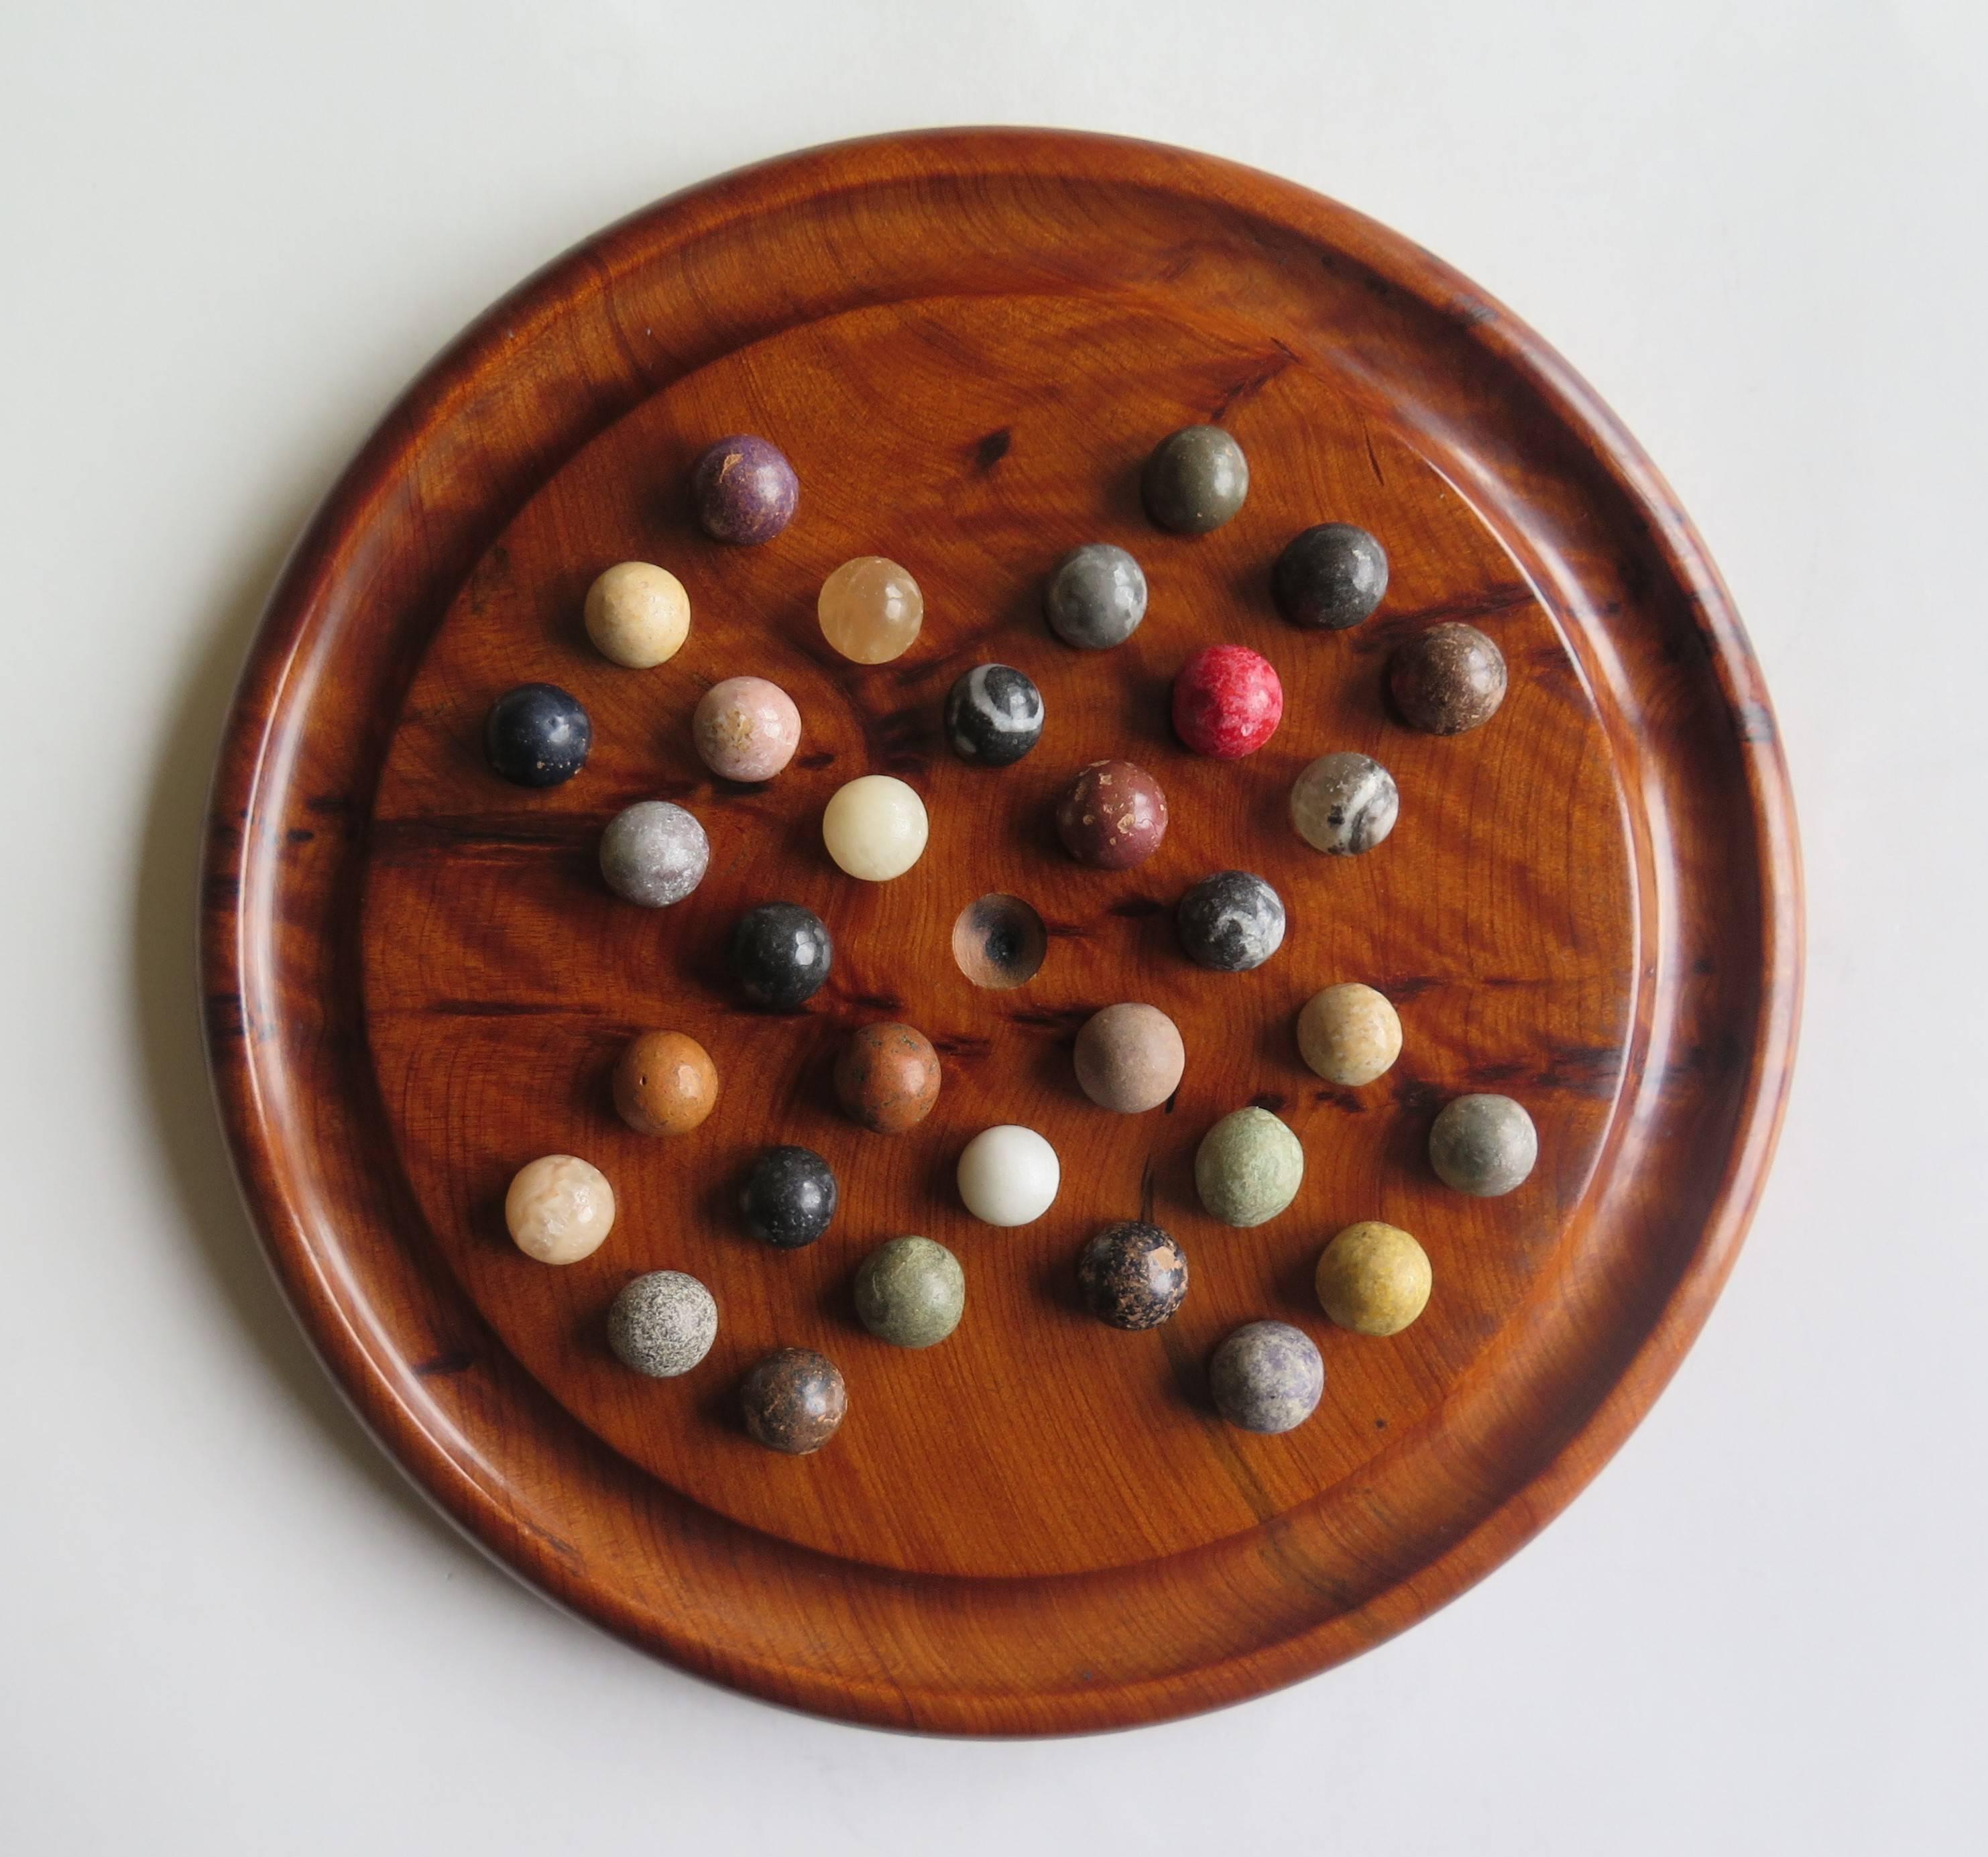 Late Victorian Late 19th Century Solitaire Marble Board Game with 32 Handmade Marbles